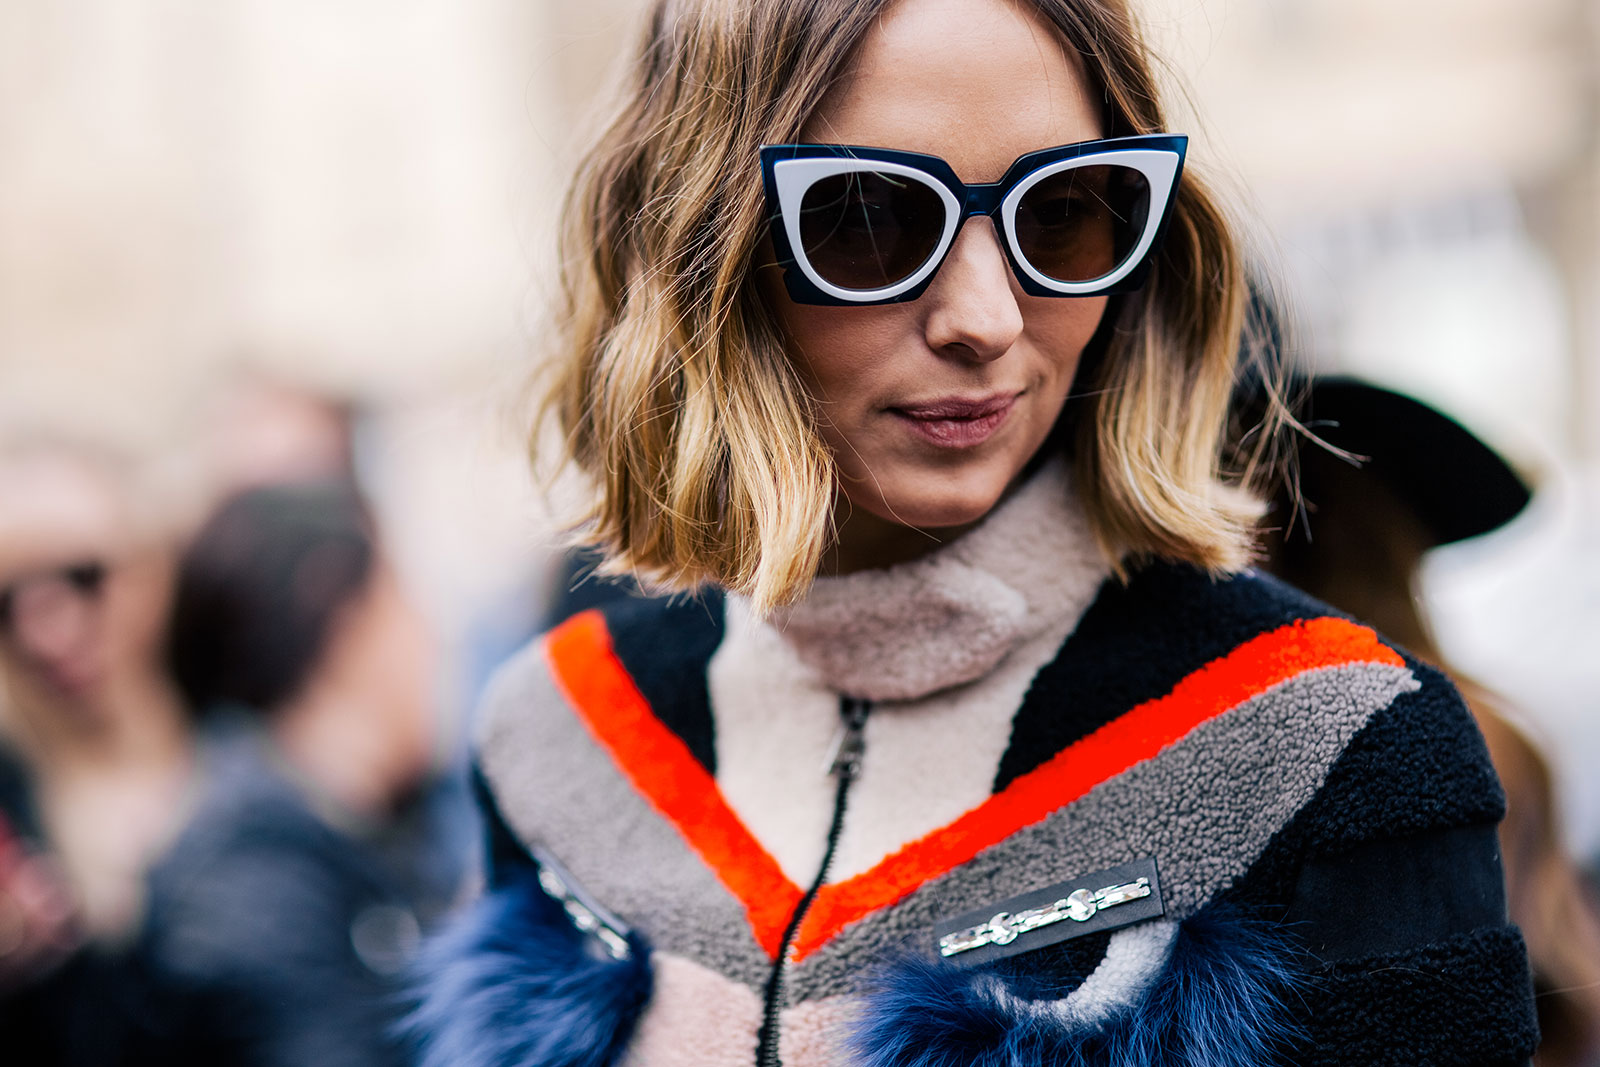 Candela Novembre wearing a Fendi jacket and Fendi sunglasses after the Fendi Fall 2015 fashion show in Milan, Italy